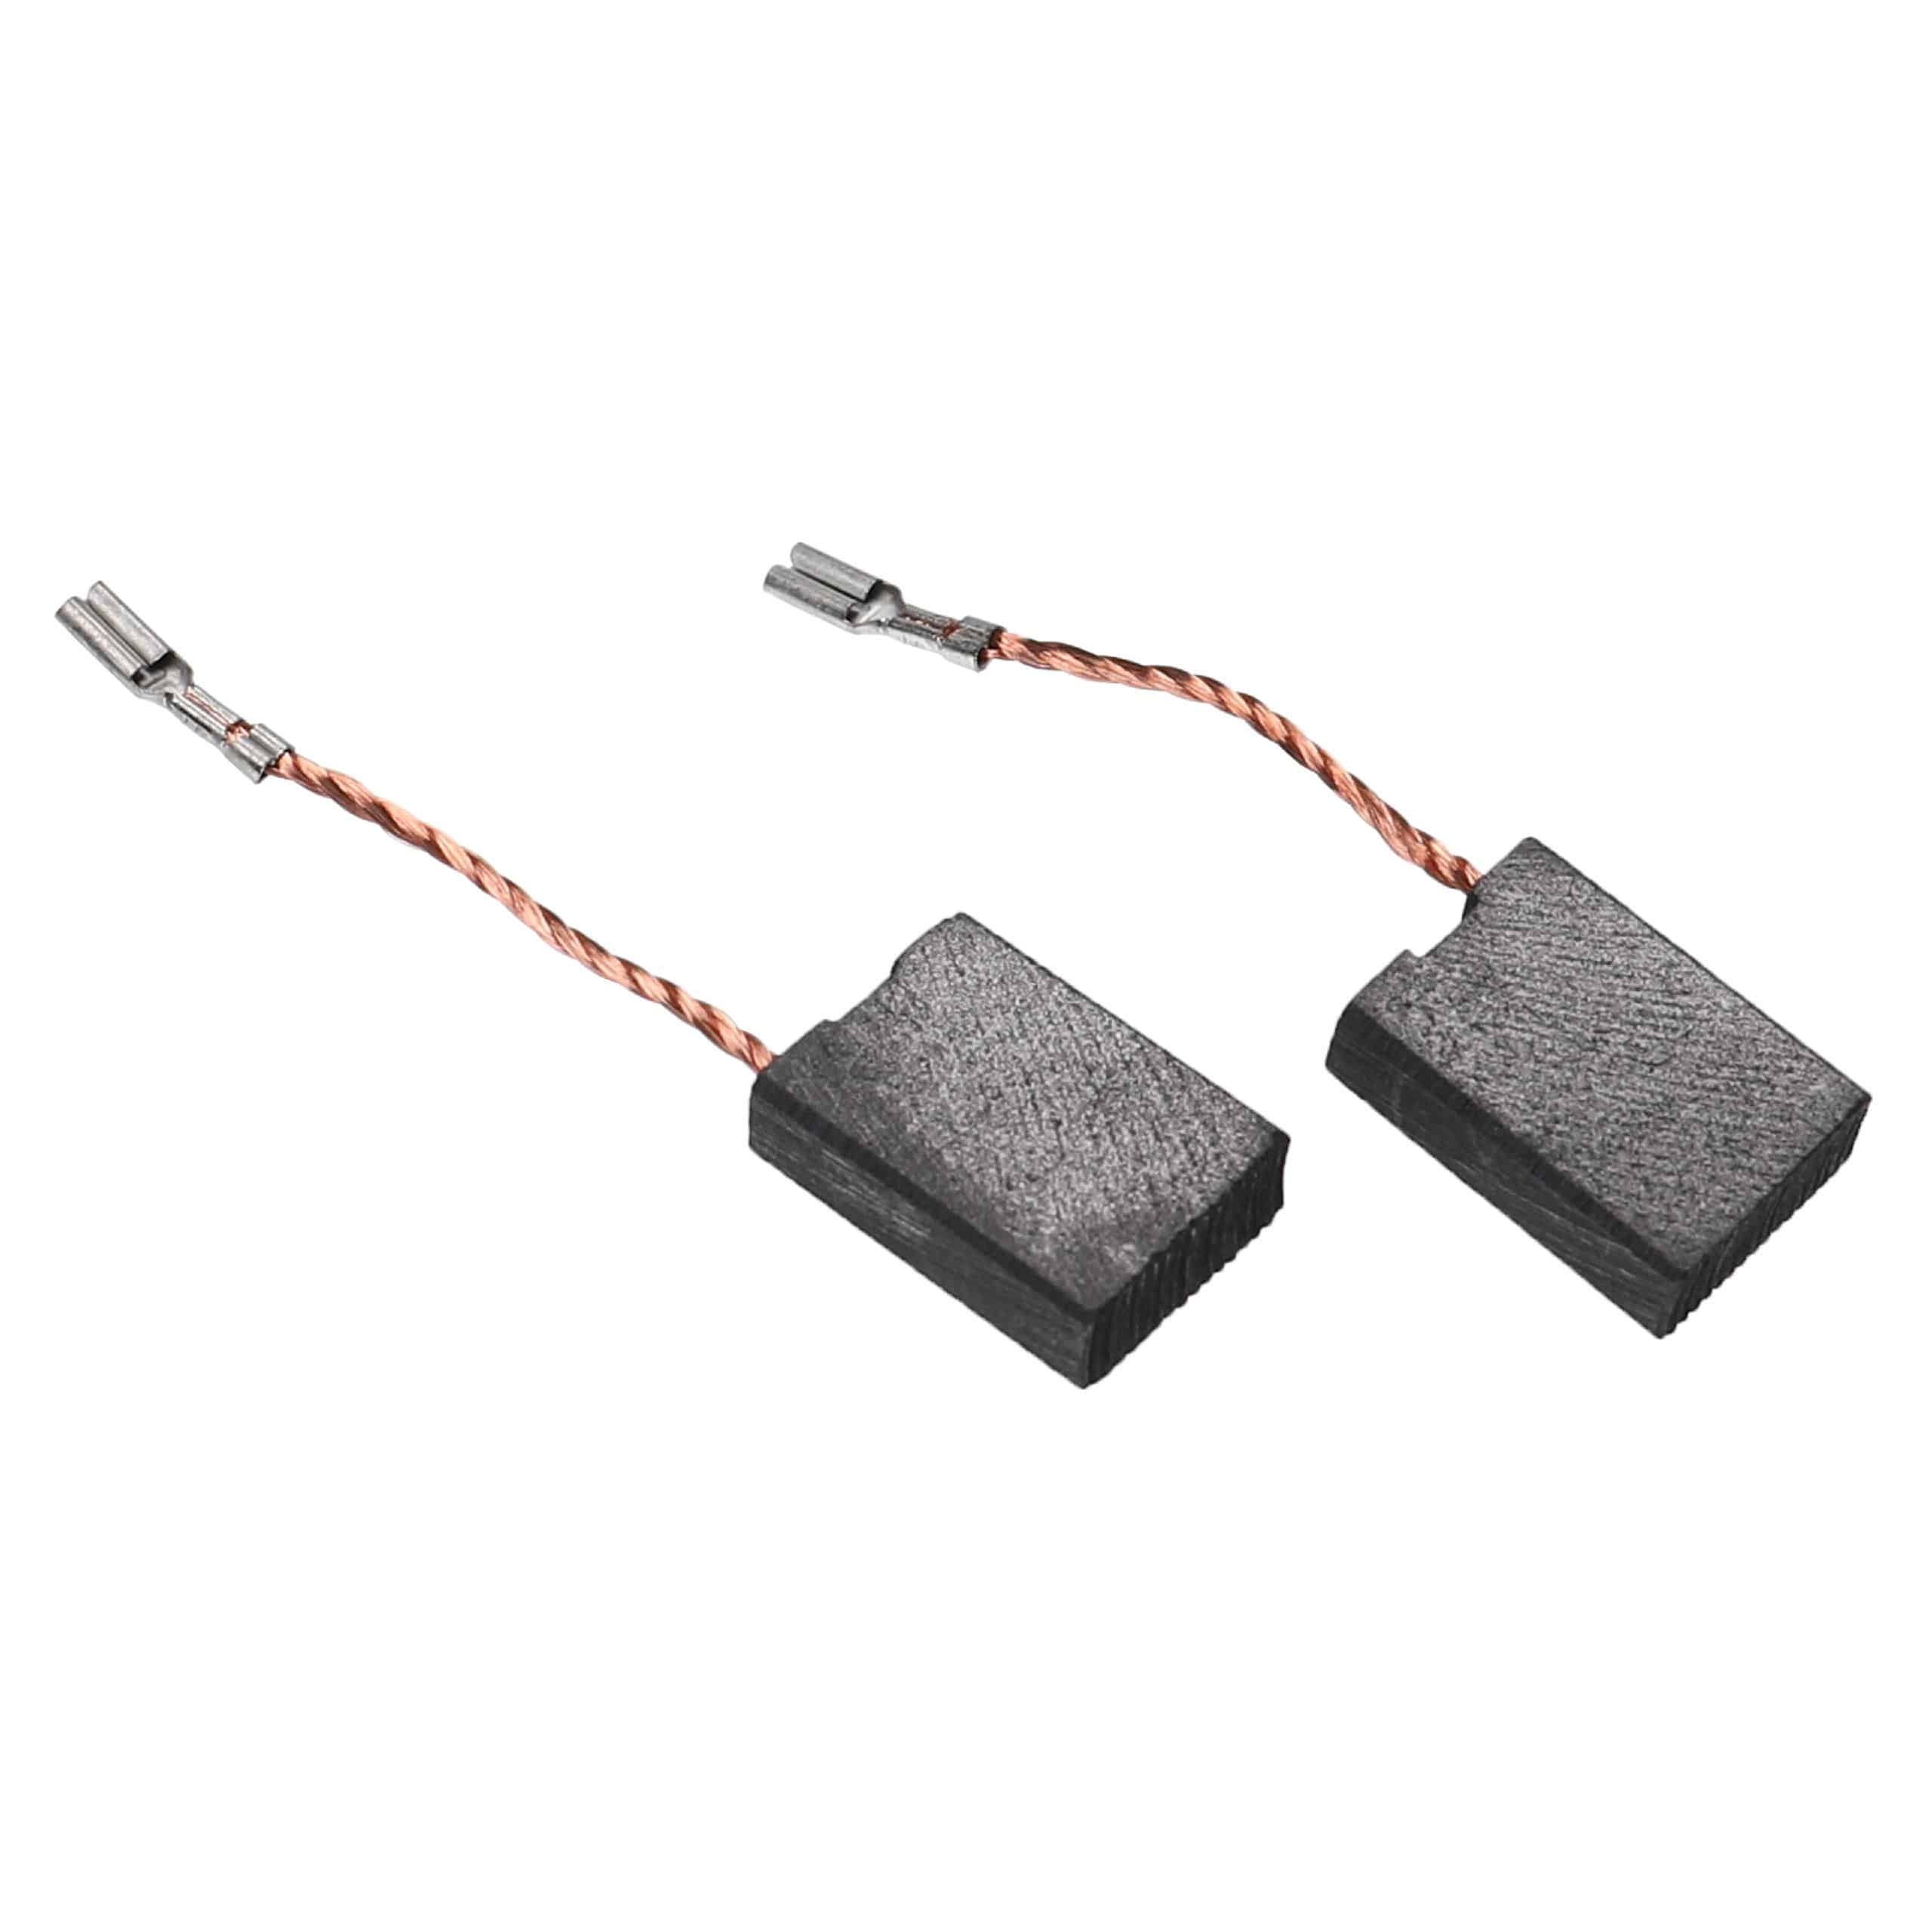 2x Carbon Brush as Replacement for Hitachi 999-089 Electric Power Tools, 7 x 17 x 23mm